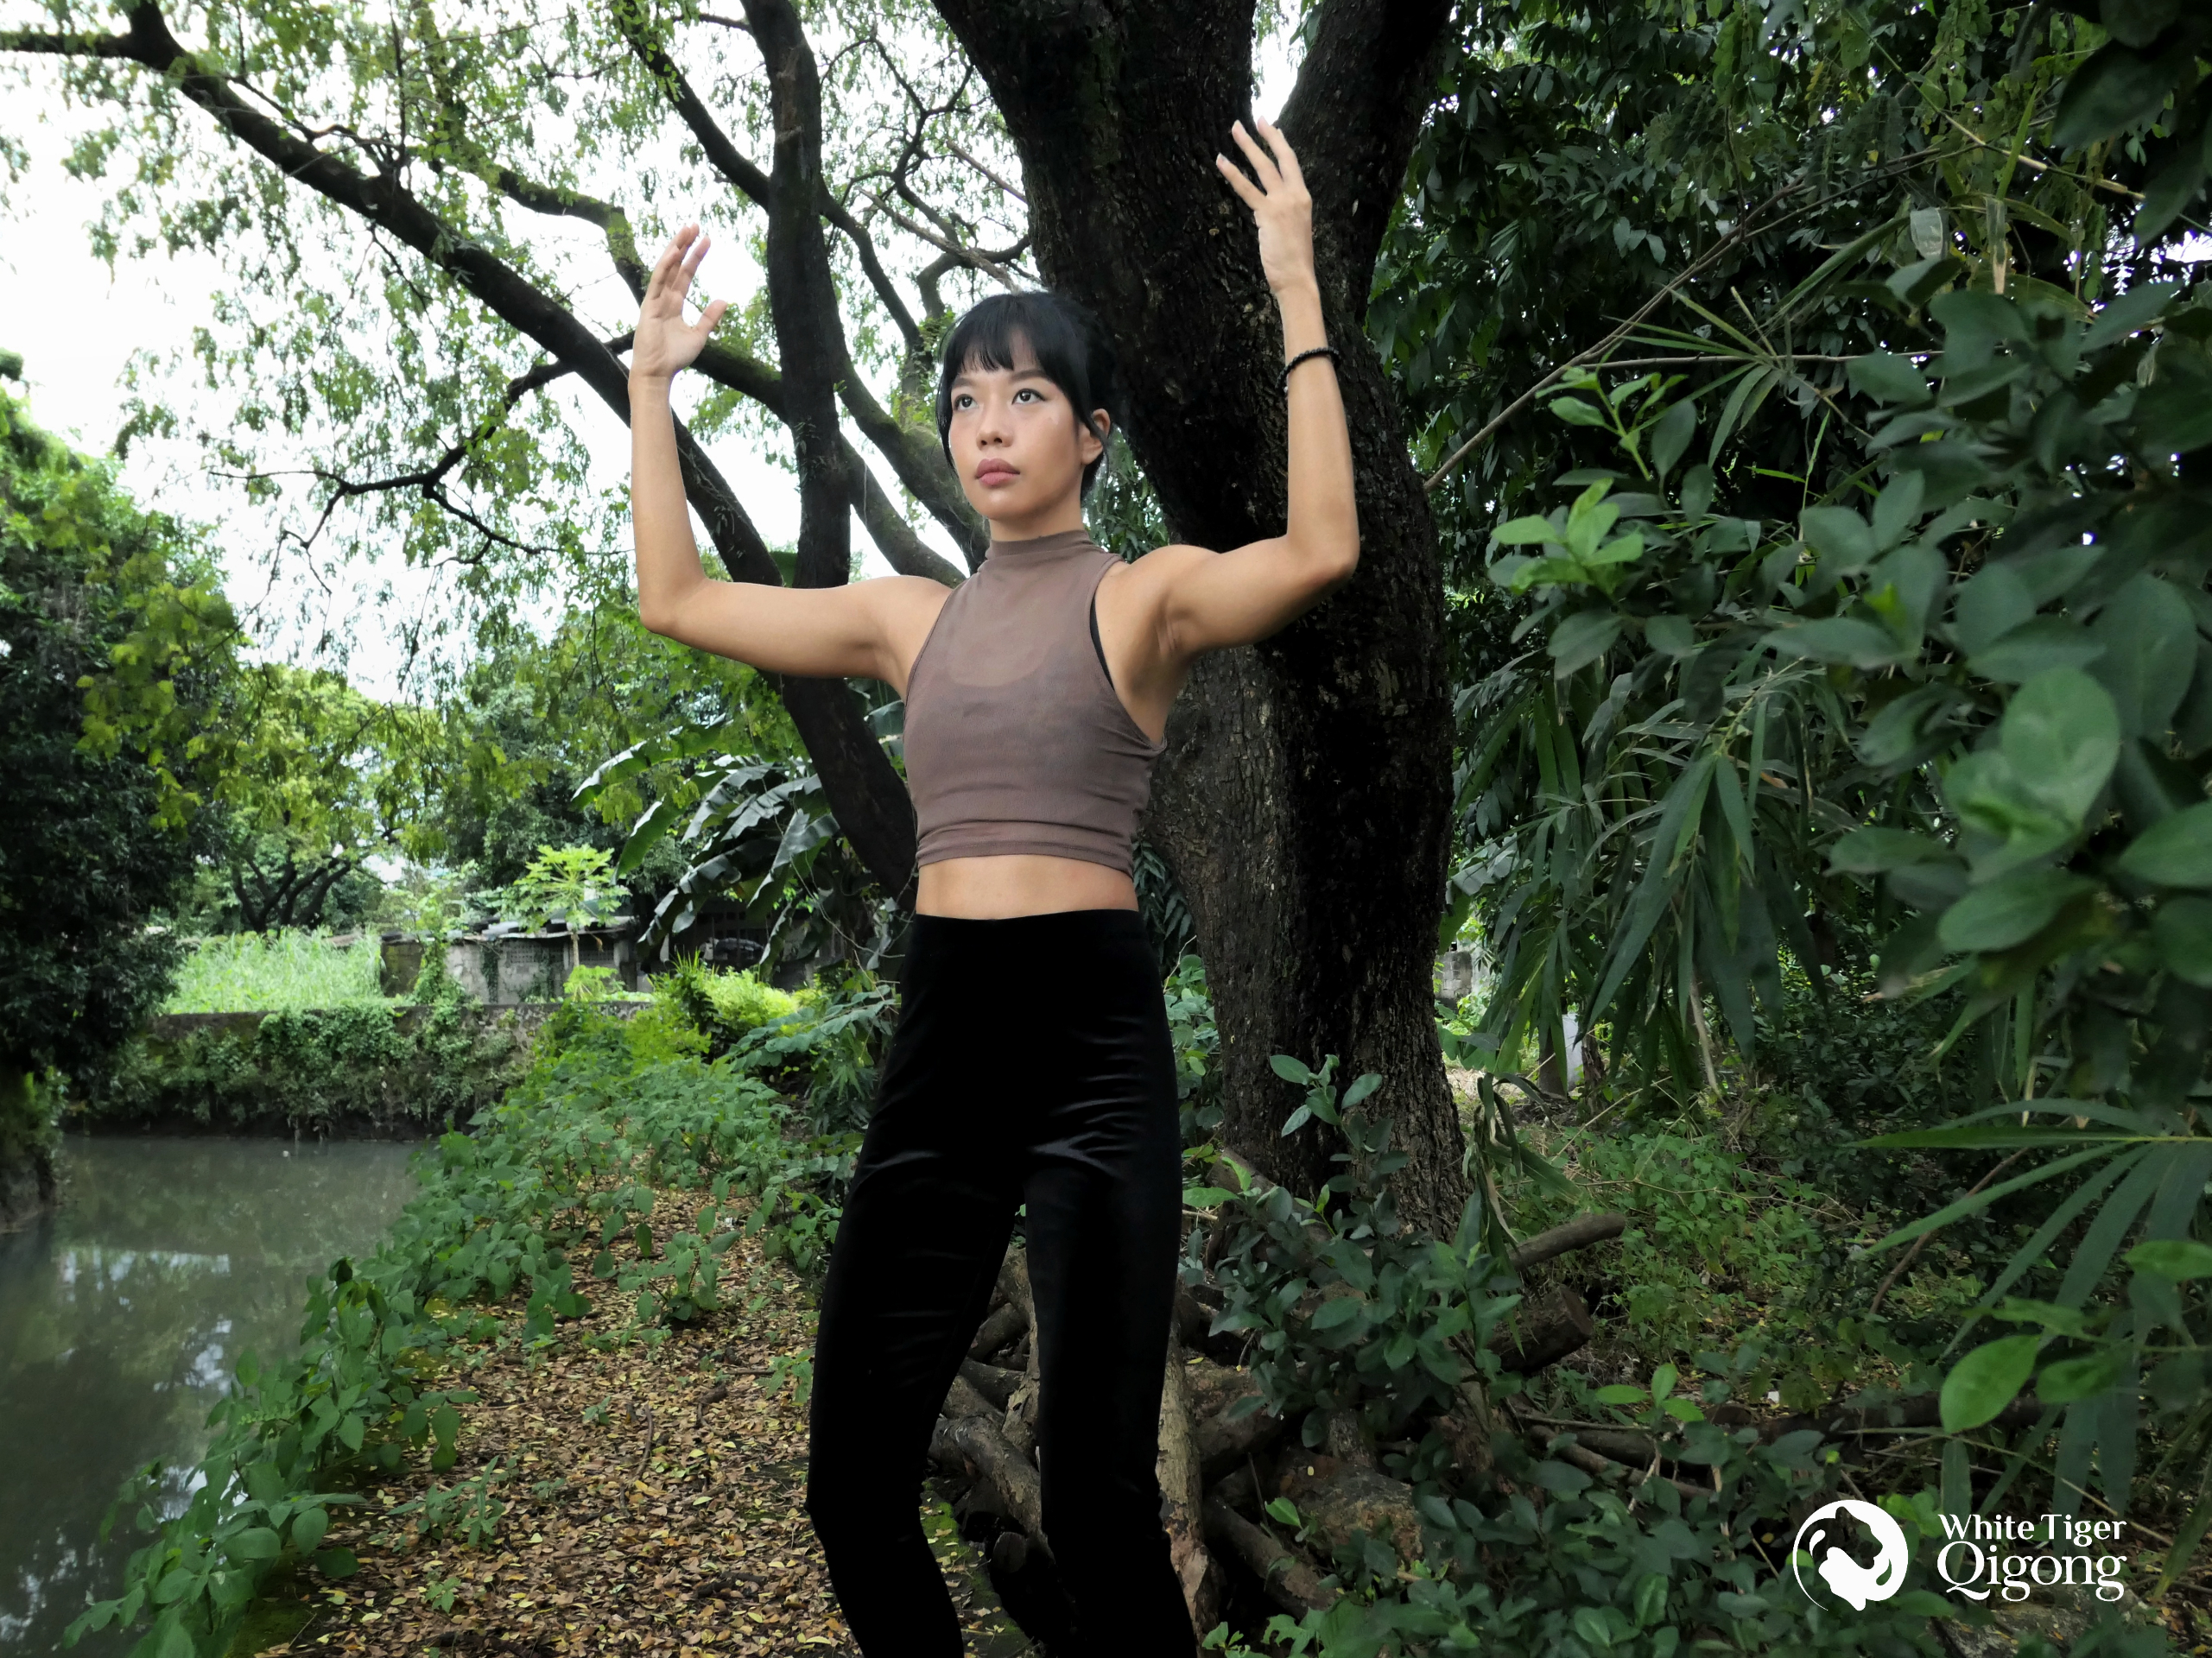 Qigong Poses - A woman practicing Holding Tree Zhan Zhuang qigong pose surrounded by nature 